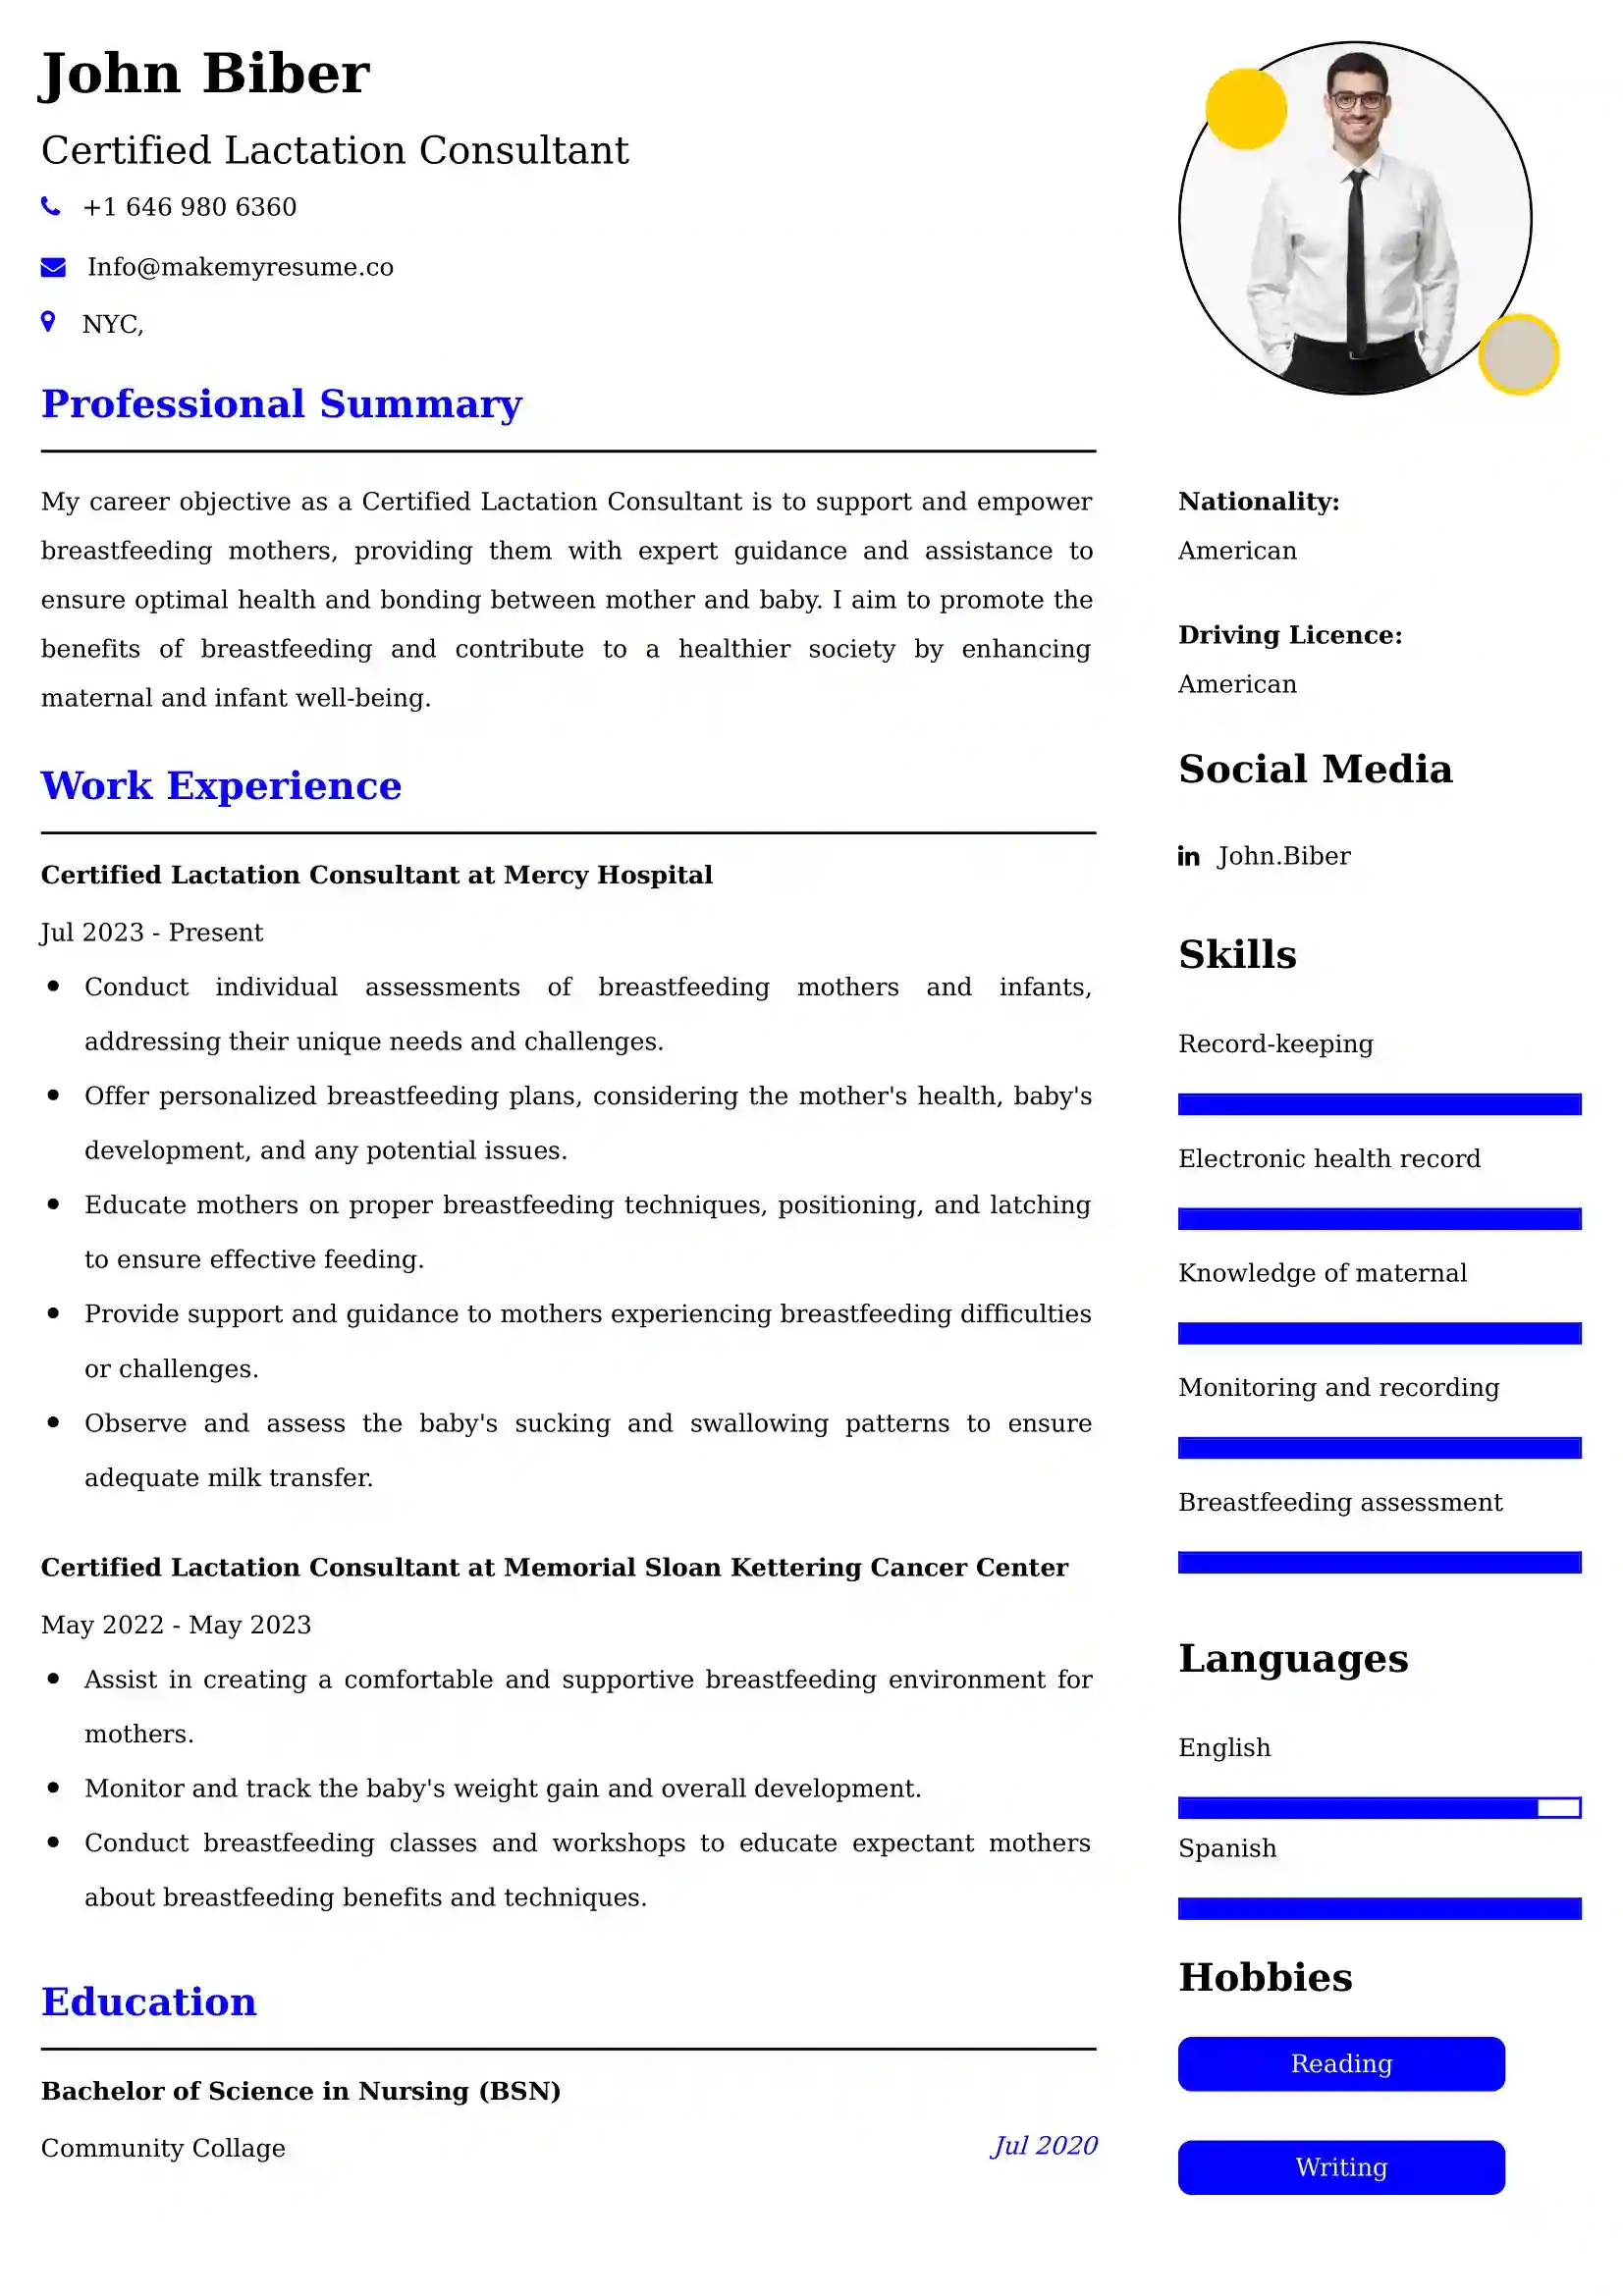 Certified Lactation Consultant Resume Examples for UK Jobs - Tips and Guide